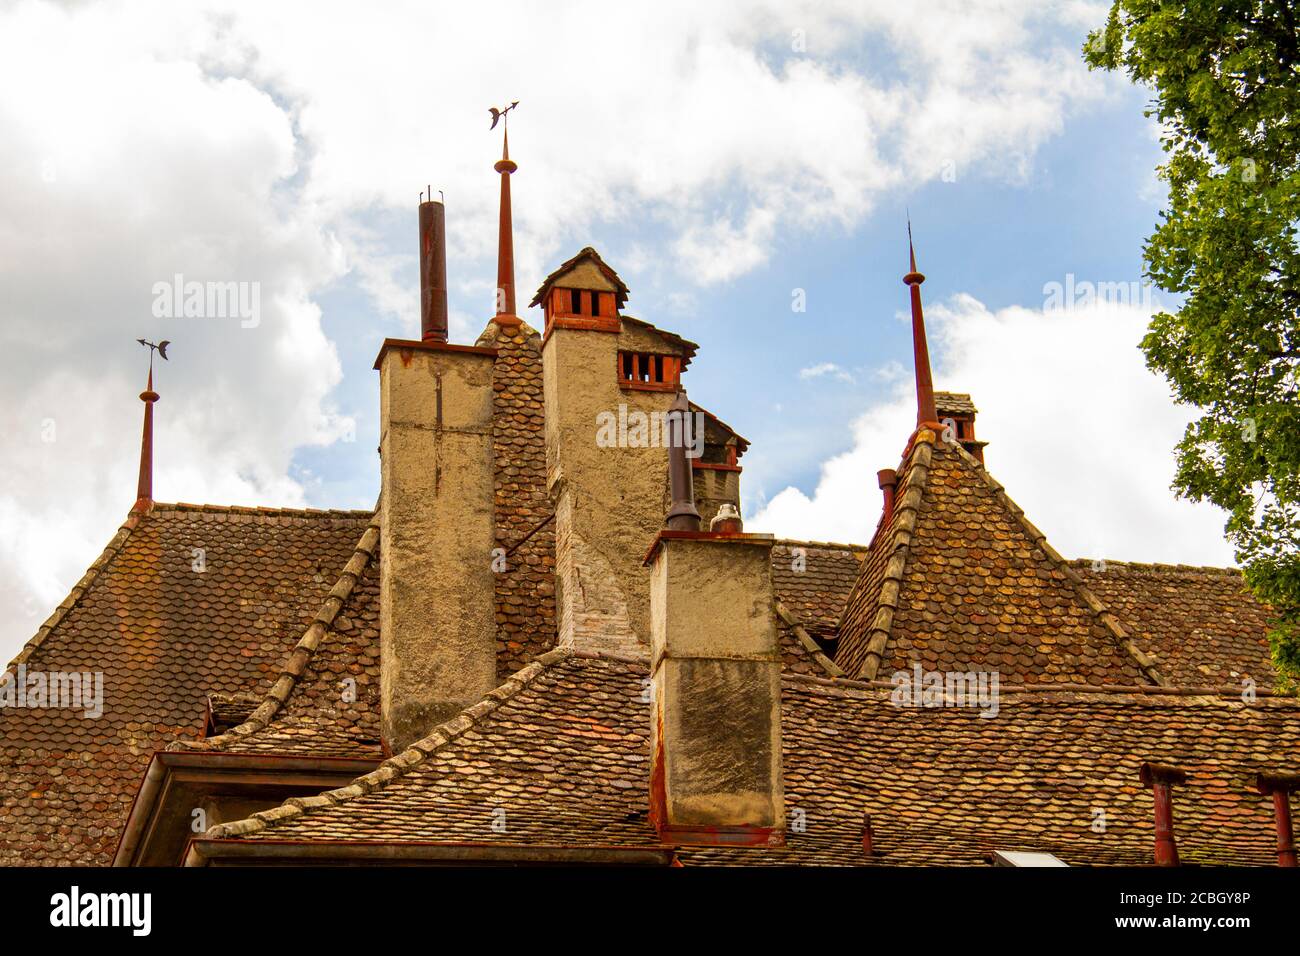 Close up isolated image of a complex traditional roof structure on a historic swiss building. Hexagonal clay tiles cover the steep slope of the roof w Stock Photo